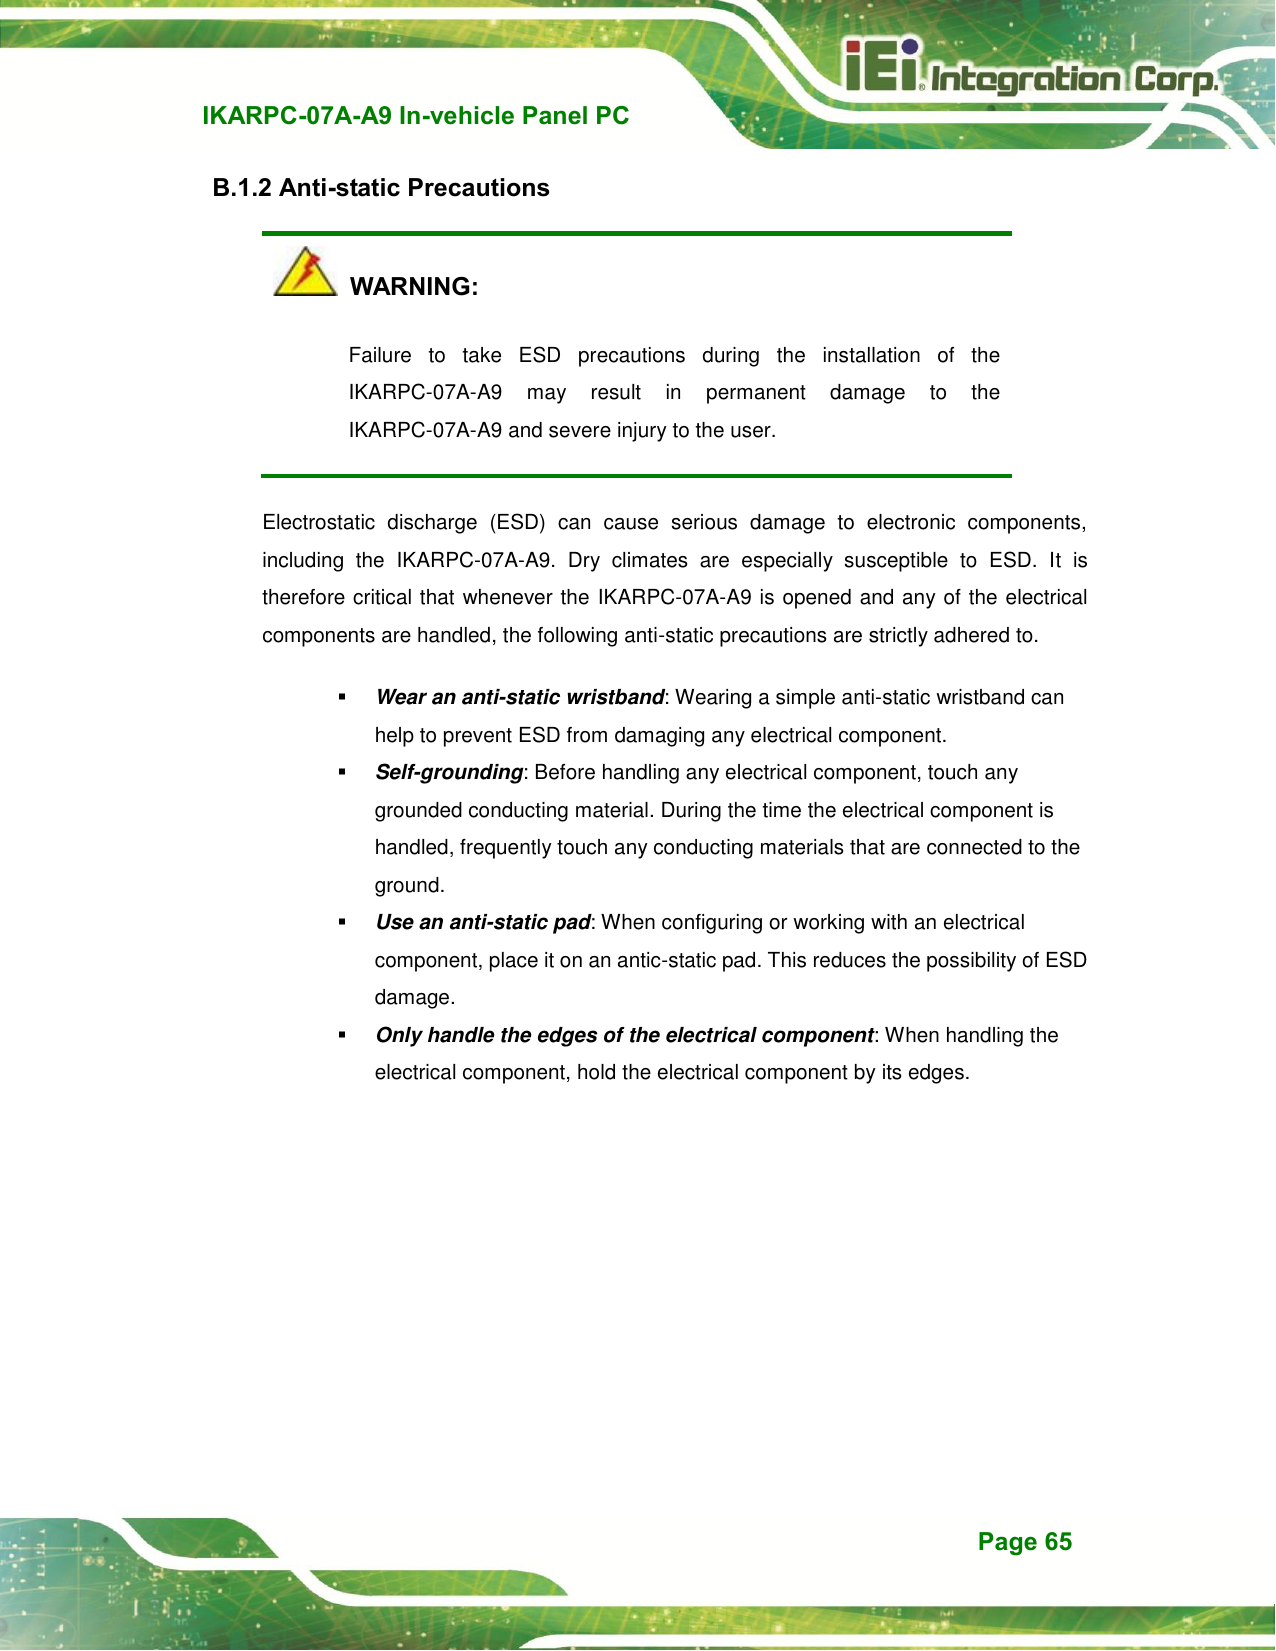   IKARPC-07A-A9 In-vehicle Panel PC  Page 65 B.1.2 Anti-static Precautions   WARNING: Failure  to  take  ESD  precautions  during  the  installation  of  the IKARPC-07A-A9  may  result  in  permanent  damage  to  the IKARPC-07A-A9 and severe injury to the user.   Electrostatic  discharge  (ESD)  can  cause  serious  damage  to  electronic  components, including  the  IKARPC-07A-A9.  Dry  climates  are  especially  susceptible  to  ESD.  It  is therefore critical that whenever the IKARPC-07A-A9 is opened and any of the electrical components are handled, the following anti-static precautions are strictly adhered to.  Wear an anti-static wristband: Wearing a simple anti-static wristband can help to prevent ESD from damaging any electrical component.  Self-grounding: Before handling any electrical component, touch any grounded conducting material. During the time the electrical component is handled, frequently touch any conducting materials that are connected to the ground.  Use an anti-static pad: When configuring or working with an electrical component, place it on an antic-static pad. This reduces the possibility of ESD damage.  Only handle the edges of the electrical component: When handling the electrical component, hold the electrical component by its edges. 